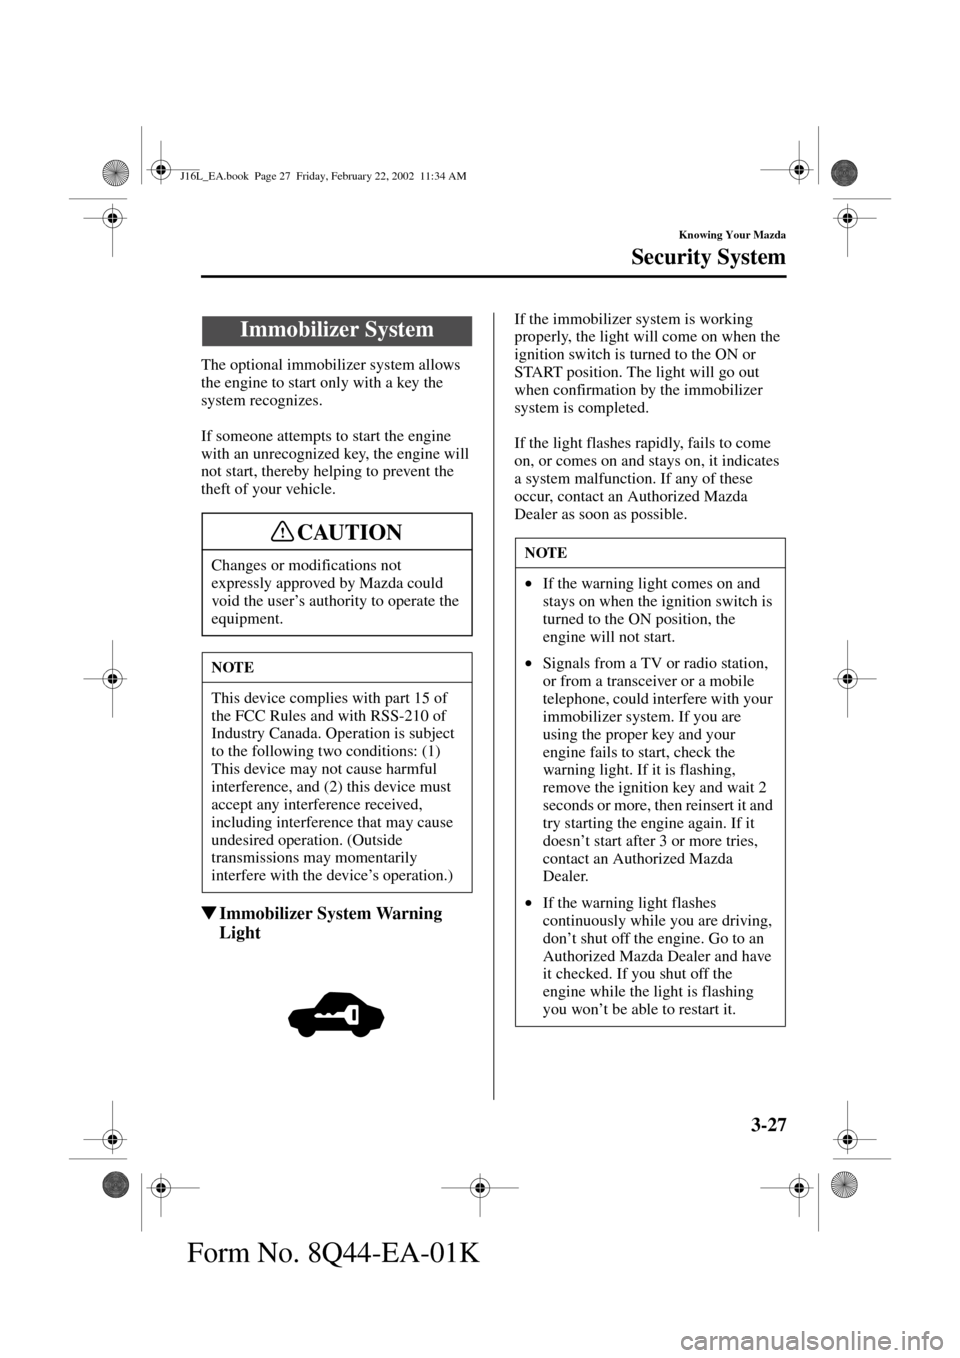 MAZDA MODEL MPV 2002  Owners Manual (in English) 3-27
Knowing Your Mazda
Form No. 8Q44-EA-01K
Security System
The optional immobilizer system allows 
the engine to start only with a key the 
system recognizes.
If someone attempts to start the engine